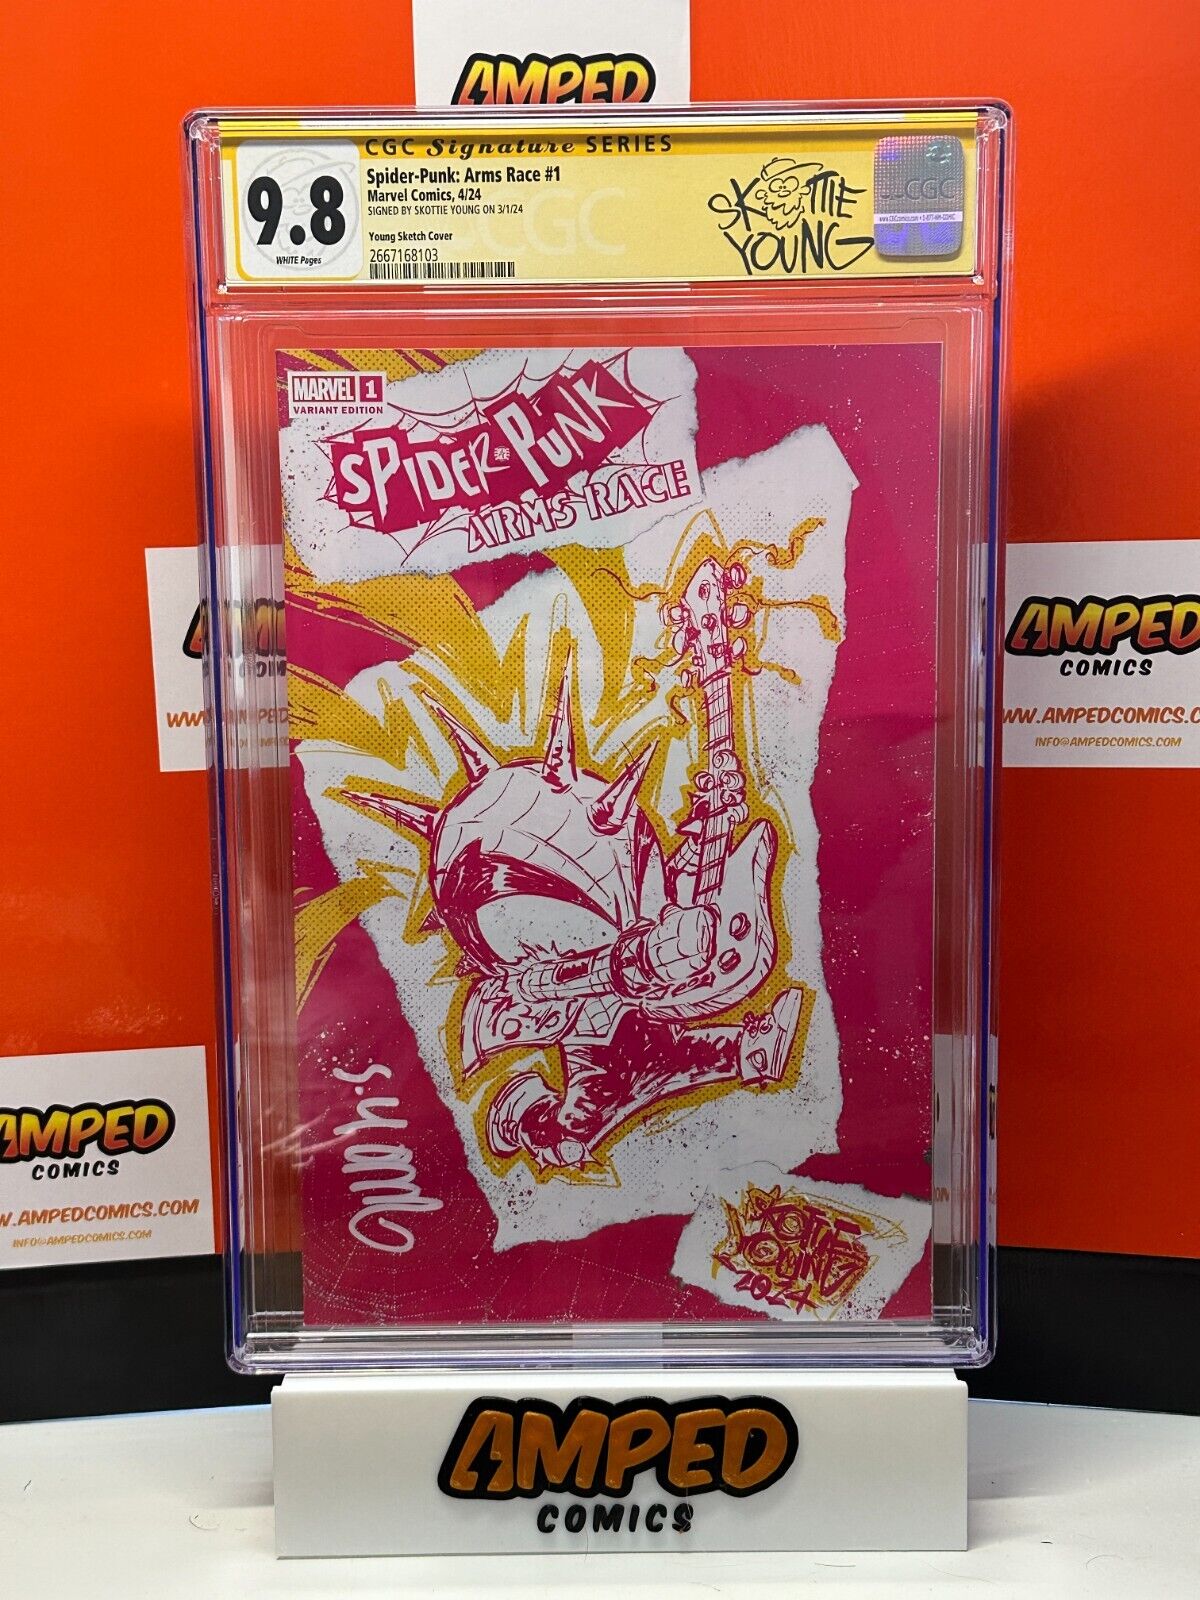 Spider-Punk Arms Race 1 Pink Punk Limit 1000 CGC 9.8 SIGNED Skottie Young label